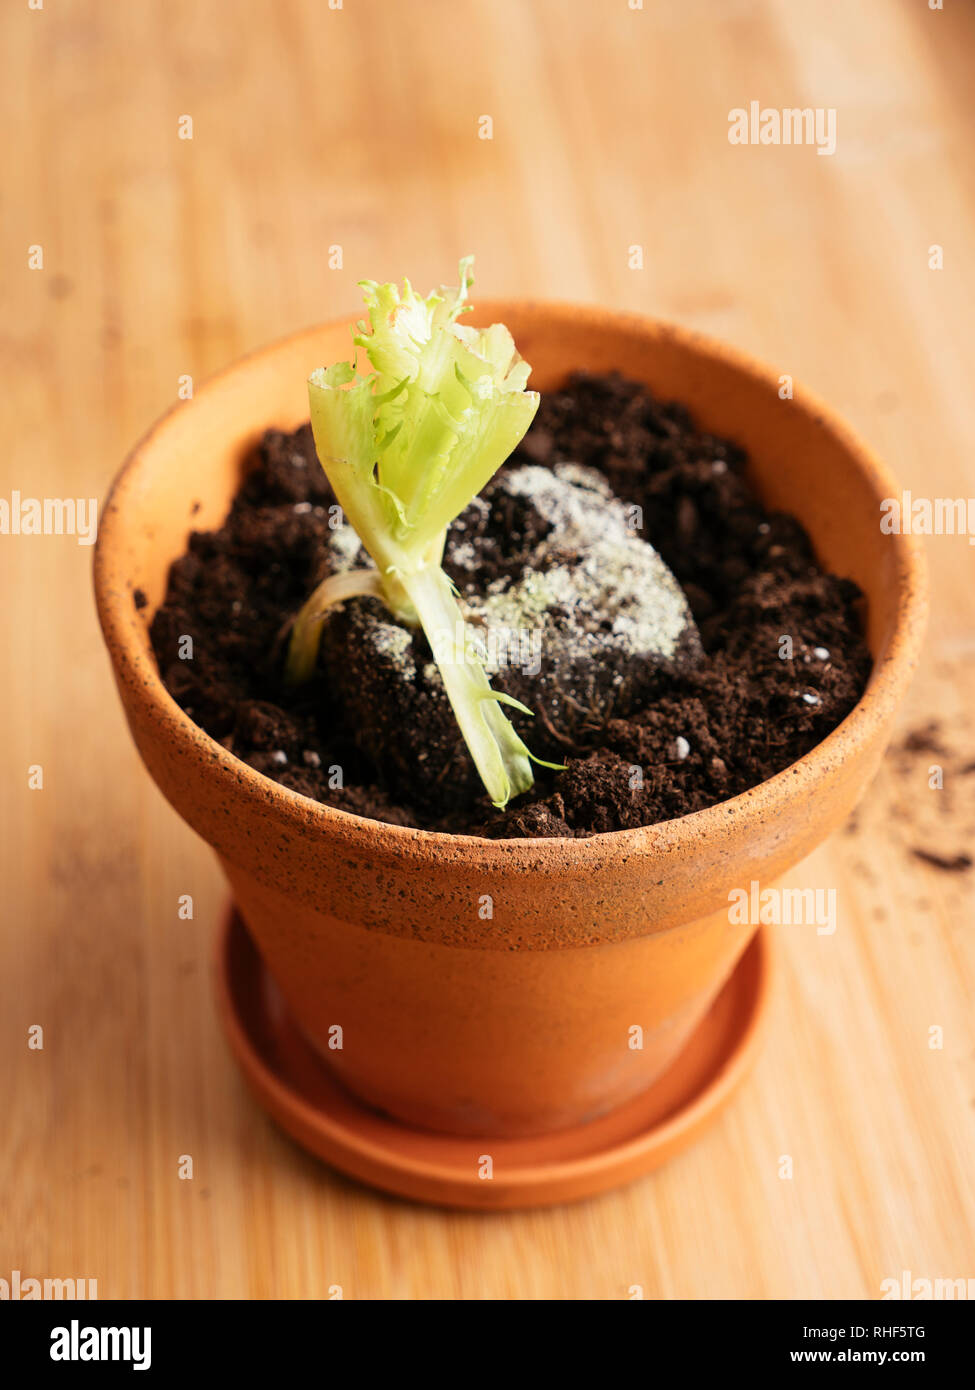 Lettuce scraps with roots replanted in a pot to produce a new lettuce. Stock Photo